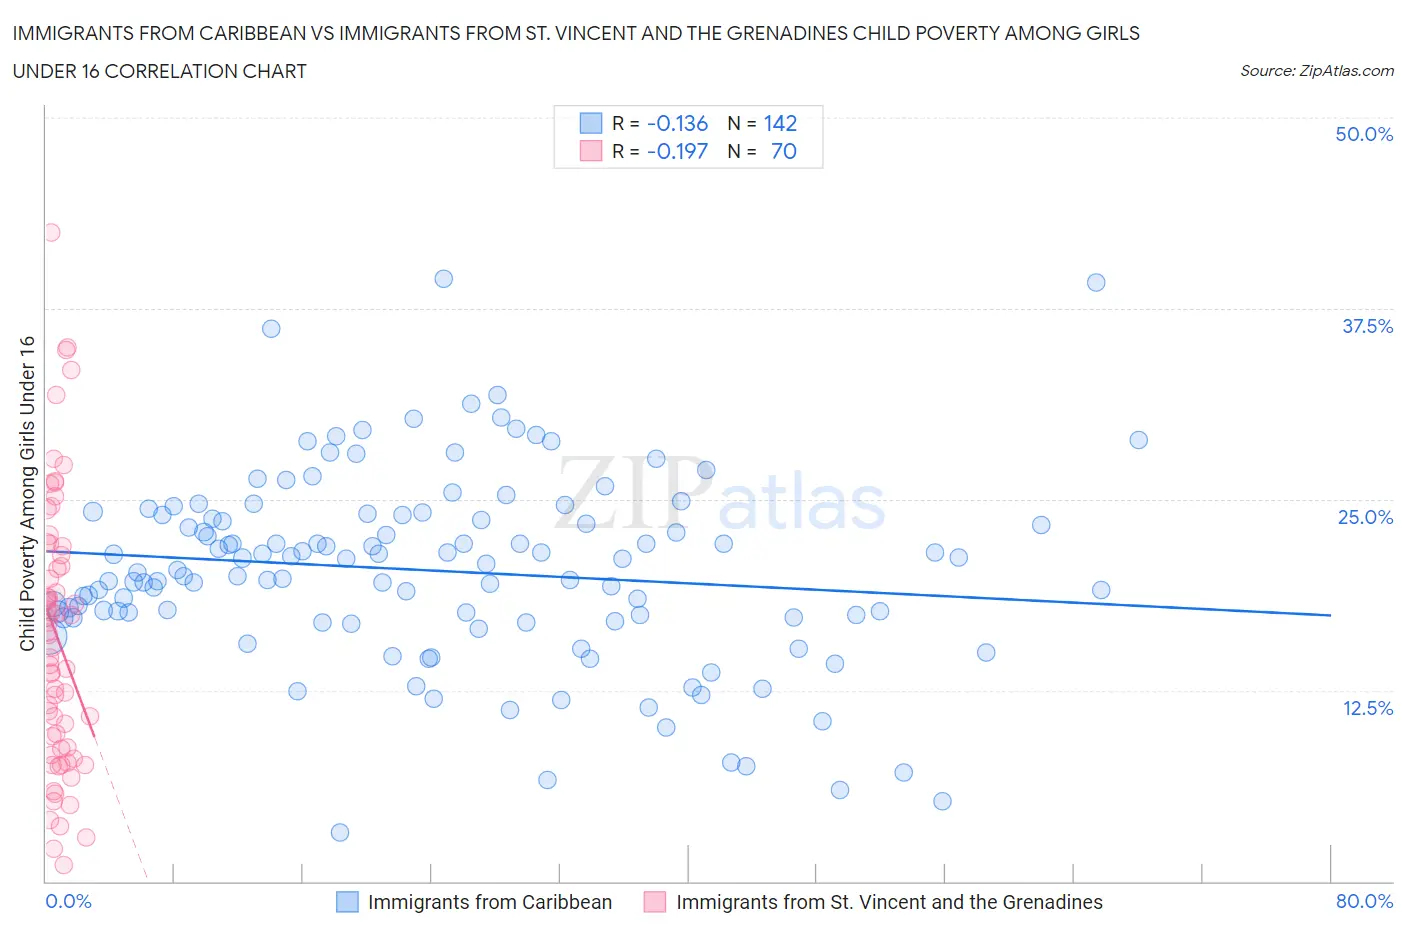 Immigrants from Caribbean vs Immigrants from St. Vincent and the Grenadines Child Poverty Among Girls Under 16